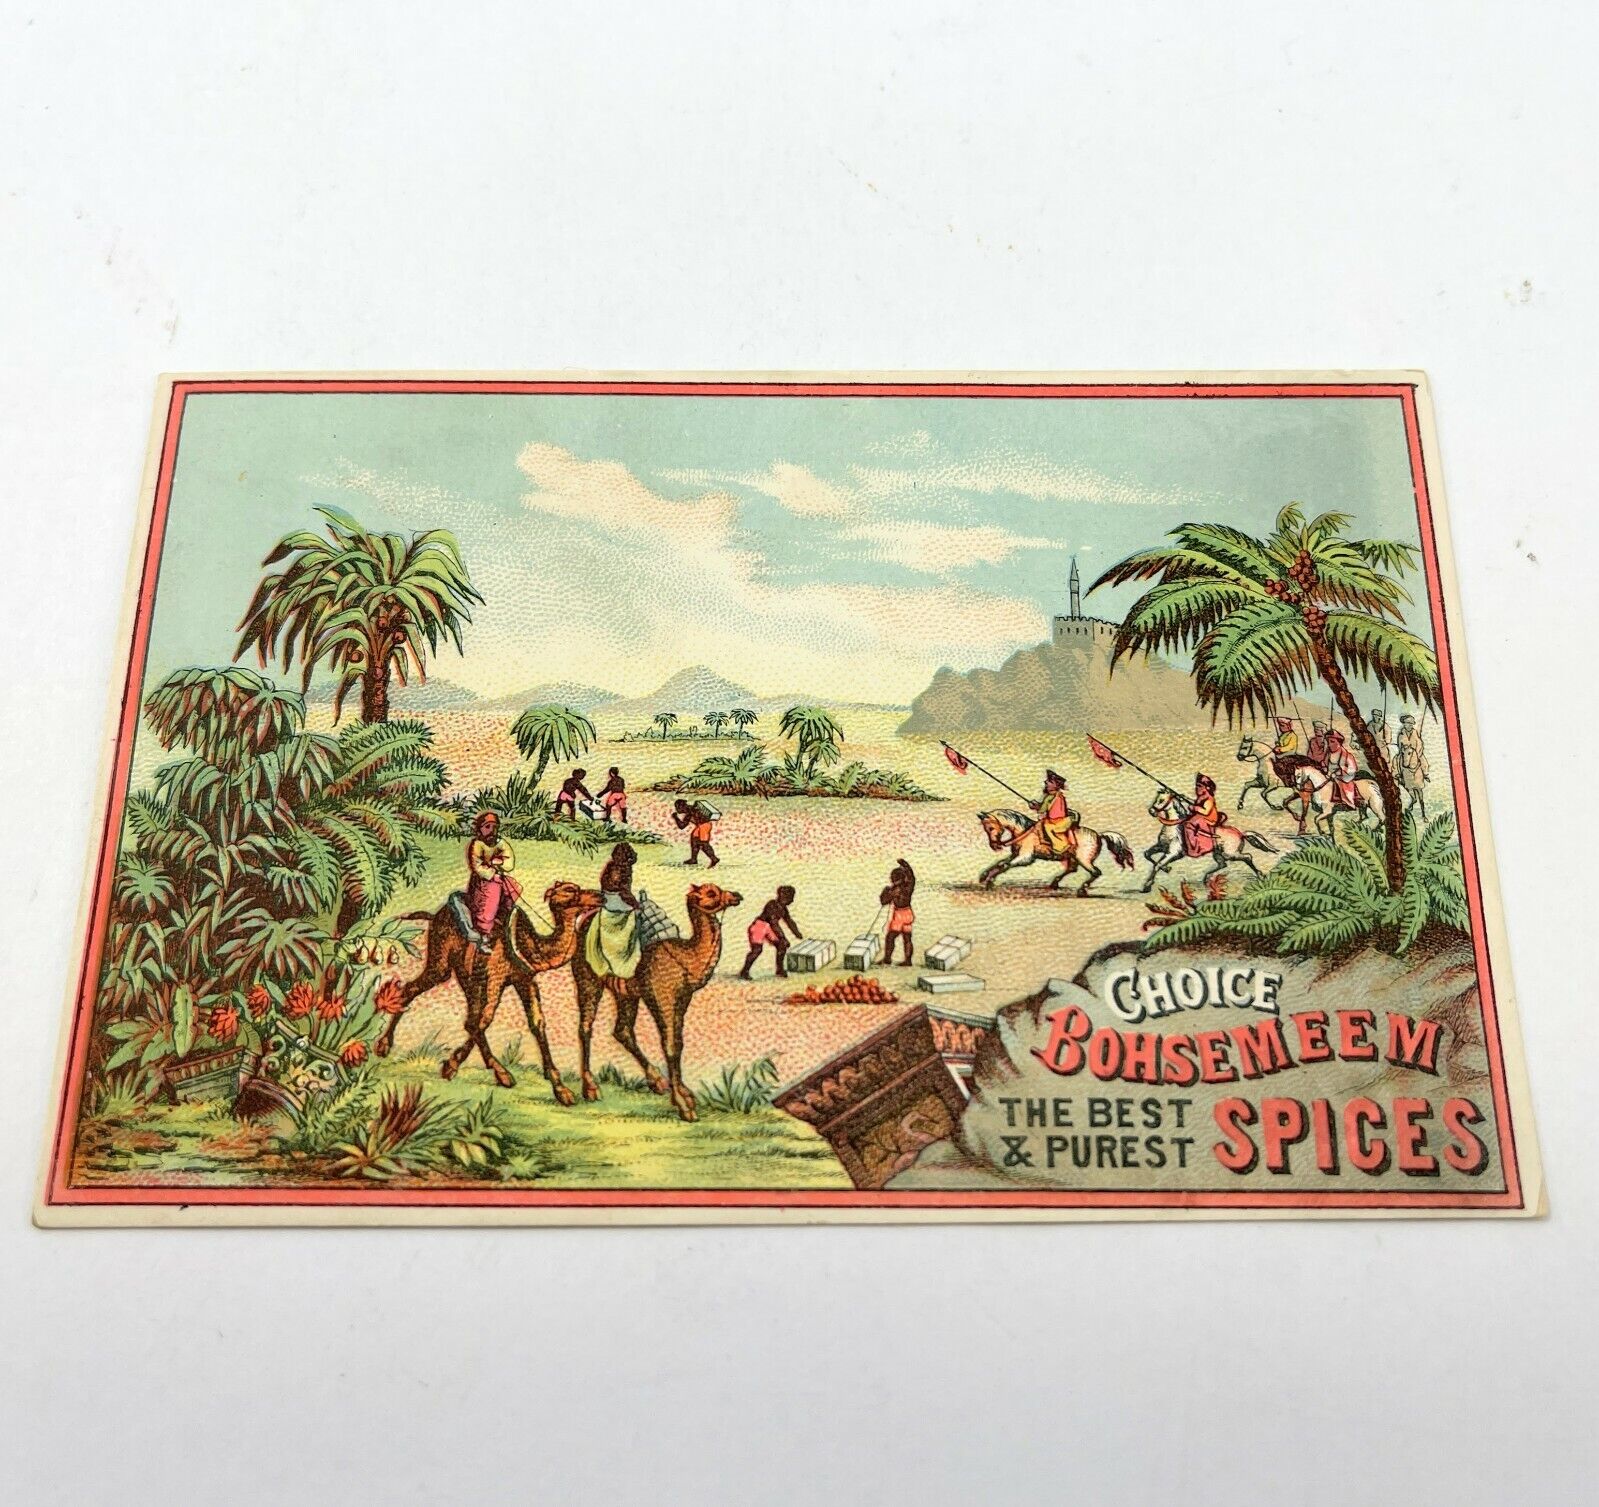 Victorian Trade Card Bohsemeem Spices Black Natives Camels Weikel Smith Phila